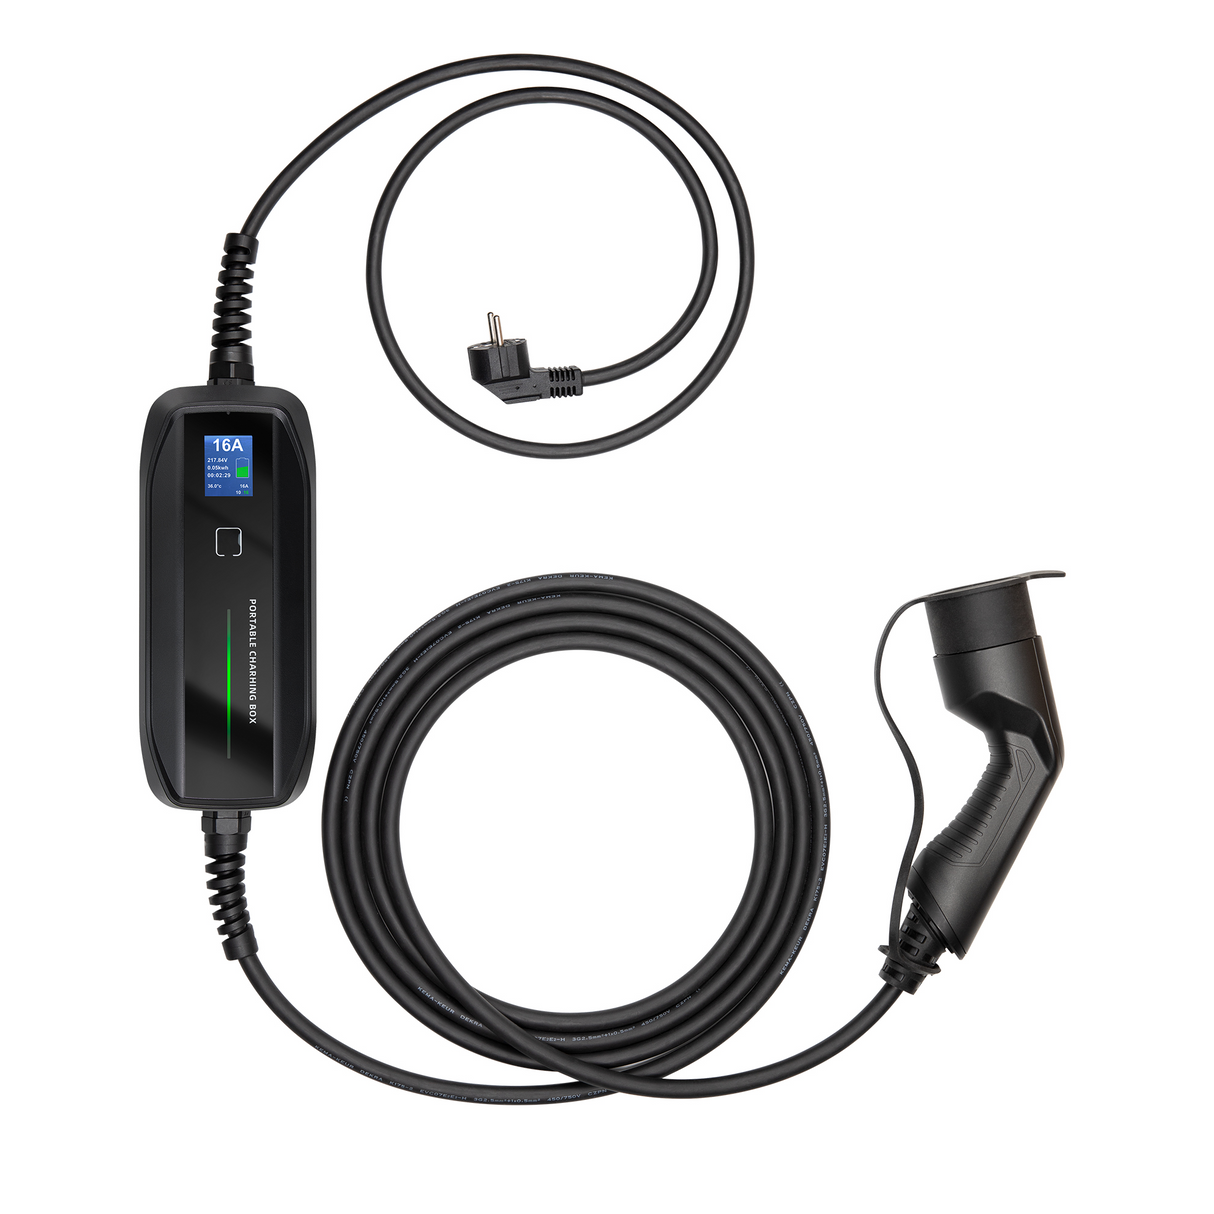 Mobile Charger Kia e-Soul - Besen with LCD - Type 2 to Schuko